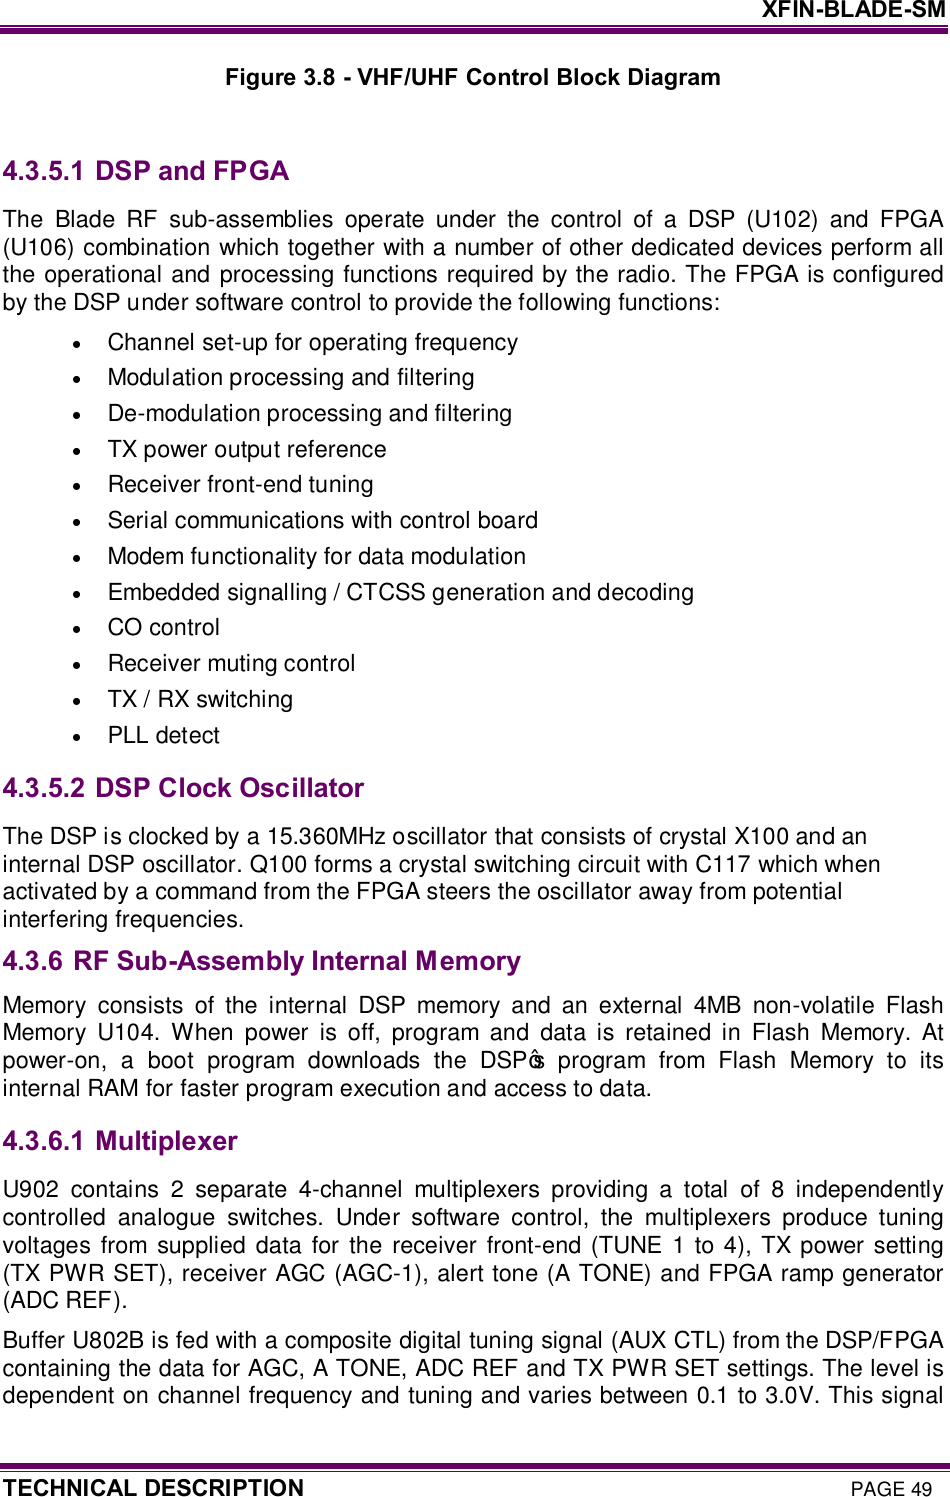     XFIN-BLADE-SM TECHNICAL DESCRIPTION PAGE 49 Figure 3.8 - VHF/UHF Control Block Diagram  4.3.5.1  DSP and FPGA The  Blade  RF  sub-assemblies  operate  under  the  control  of  a  DSP  (U102)  and  FPGA (U106) combination which together with a number of other dedicated devices perform all the operational and processing functions required by the radio. The FPGA is configured by the DSP under software control to provide the following functions: · Channel set-up for operating frequency · Modulation processing and filtering  · De-modulation processing and filtering  · TX power output reference  · Receiver front-end tuning  · Serial communications with control board · Modem functionality for data modulation · Embedded signalling / CTCSS generation and decoding  · CO control · Receiver muting control · TX / RX switching · PLL detect 4.3.5.2  DSP Clock Oscillator The DSP is clocked by a 15.360MHz oscillator that consists of crystal X100 and an internal DSP oscillator. Q100 forms a crystal switching circuit with C117 which when activated by a command from the FPGA steers the oscillator away from potential interfering frequencies. 4.3.6 RF Sub-Assembly Internal Memory Memory  consists  of  the  internal  DSP  memory  and  an  external  4MB  non-volatile  Flash Memory  U104.  When  power  is  off,  program  and  data  is  retained  in  Flash  Memory.  At power-on,  a  boot  program  downloads  the  DSP’s  program  from  Flash  Memory  to  its internal RAM for faster program execution and access to data. 4.3.6.1  Multiplexer U902  contains  2  separate  4-channel  multiplexers  providing  a  total  of  8  independently controlled  analogue  switches.  Under  software  control,  the  multiplexers  produce  tuning voltages  from  supplied  data  for the  receiver front-end  (TUNE  1  to  4), TX power setting (TX PWR SET), receiver AGC (AGC-1), alert tone (A TONE) and FPGA ramp generator (ADC REF).  Buffer U802B is fed with a composite digital tuning signal (AUX CTL) from the DSP/FPGA containing the data for AGC, A TONE, ADC REF and TX PWR SET settings. The level is dependent on channel frequency and tuning and varies between 0.1 to 3.0V. This signal 